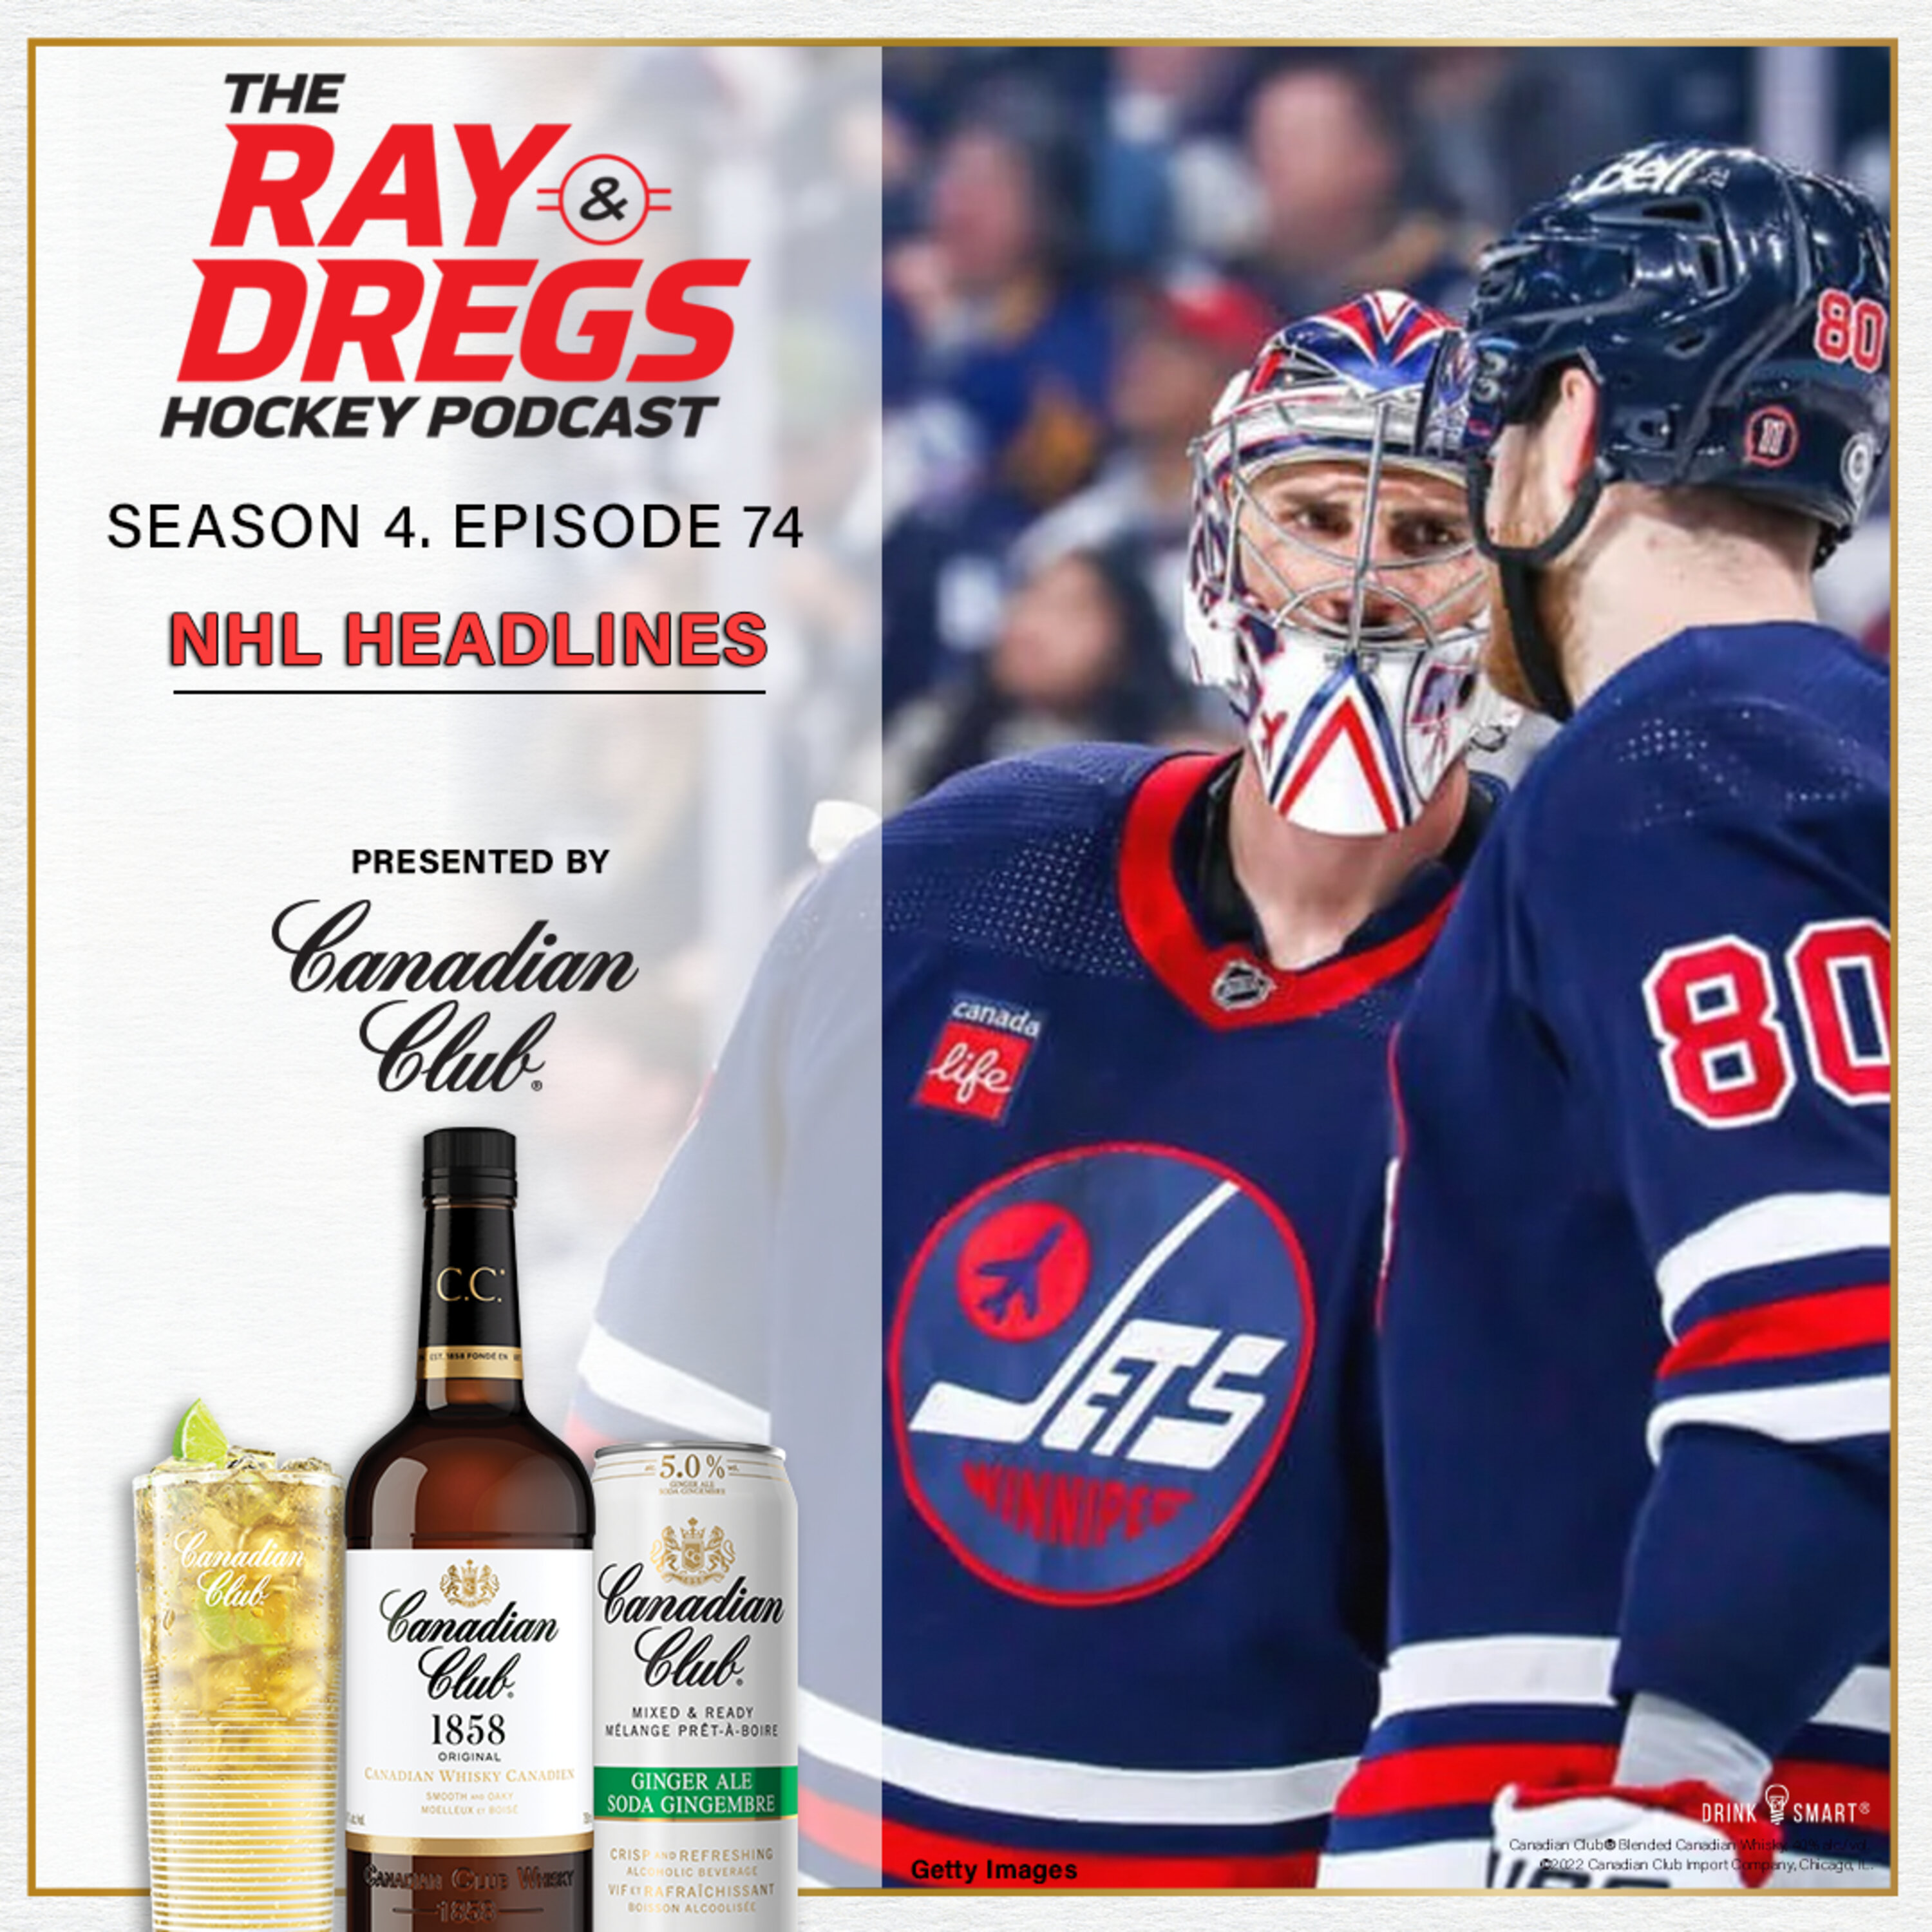 Iced Coffee, JELL-O, and a ‘Bevy’ of NHL Headlines